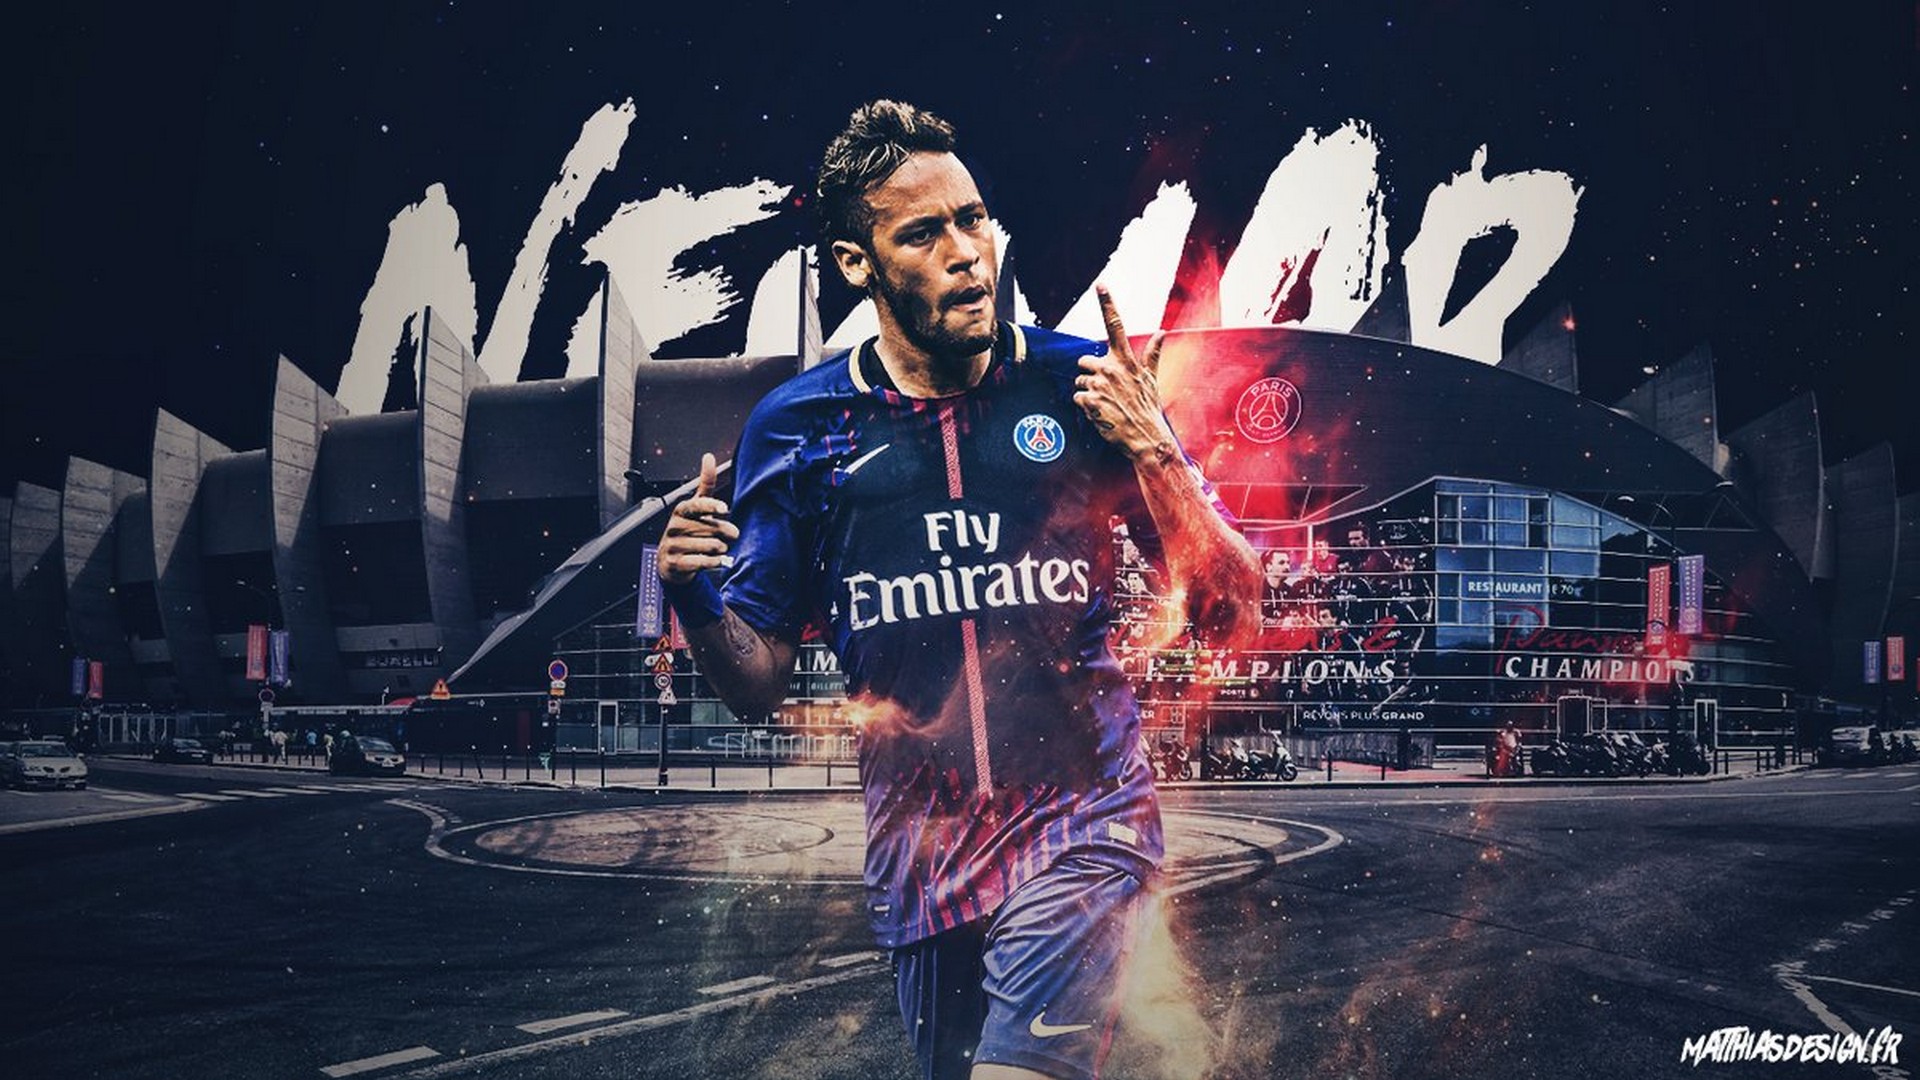 Neymar PSG Wallpaper For Desktop with image resolution 1920x1080 pixel. You can use this wallpaper as background for your desktop Computer Screensavers, Android or iPhone smartphones